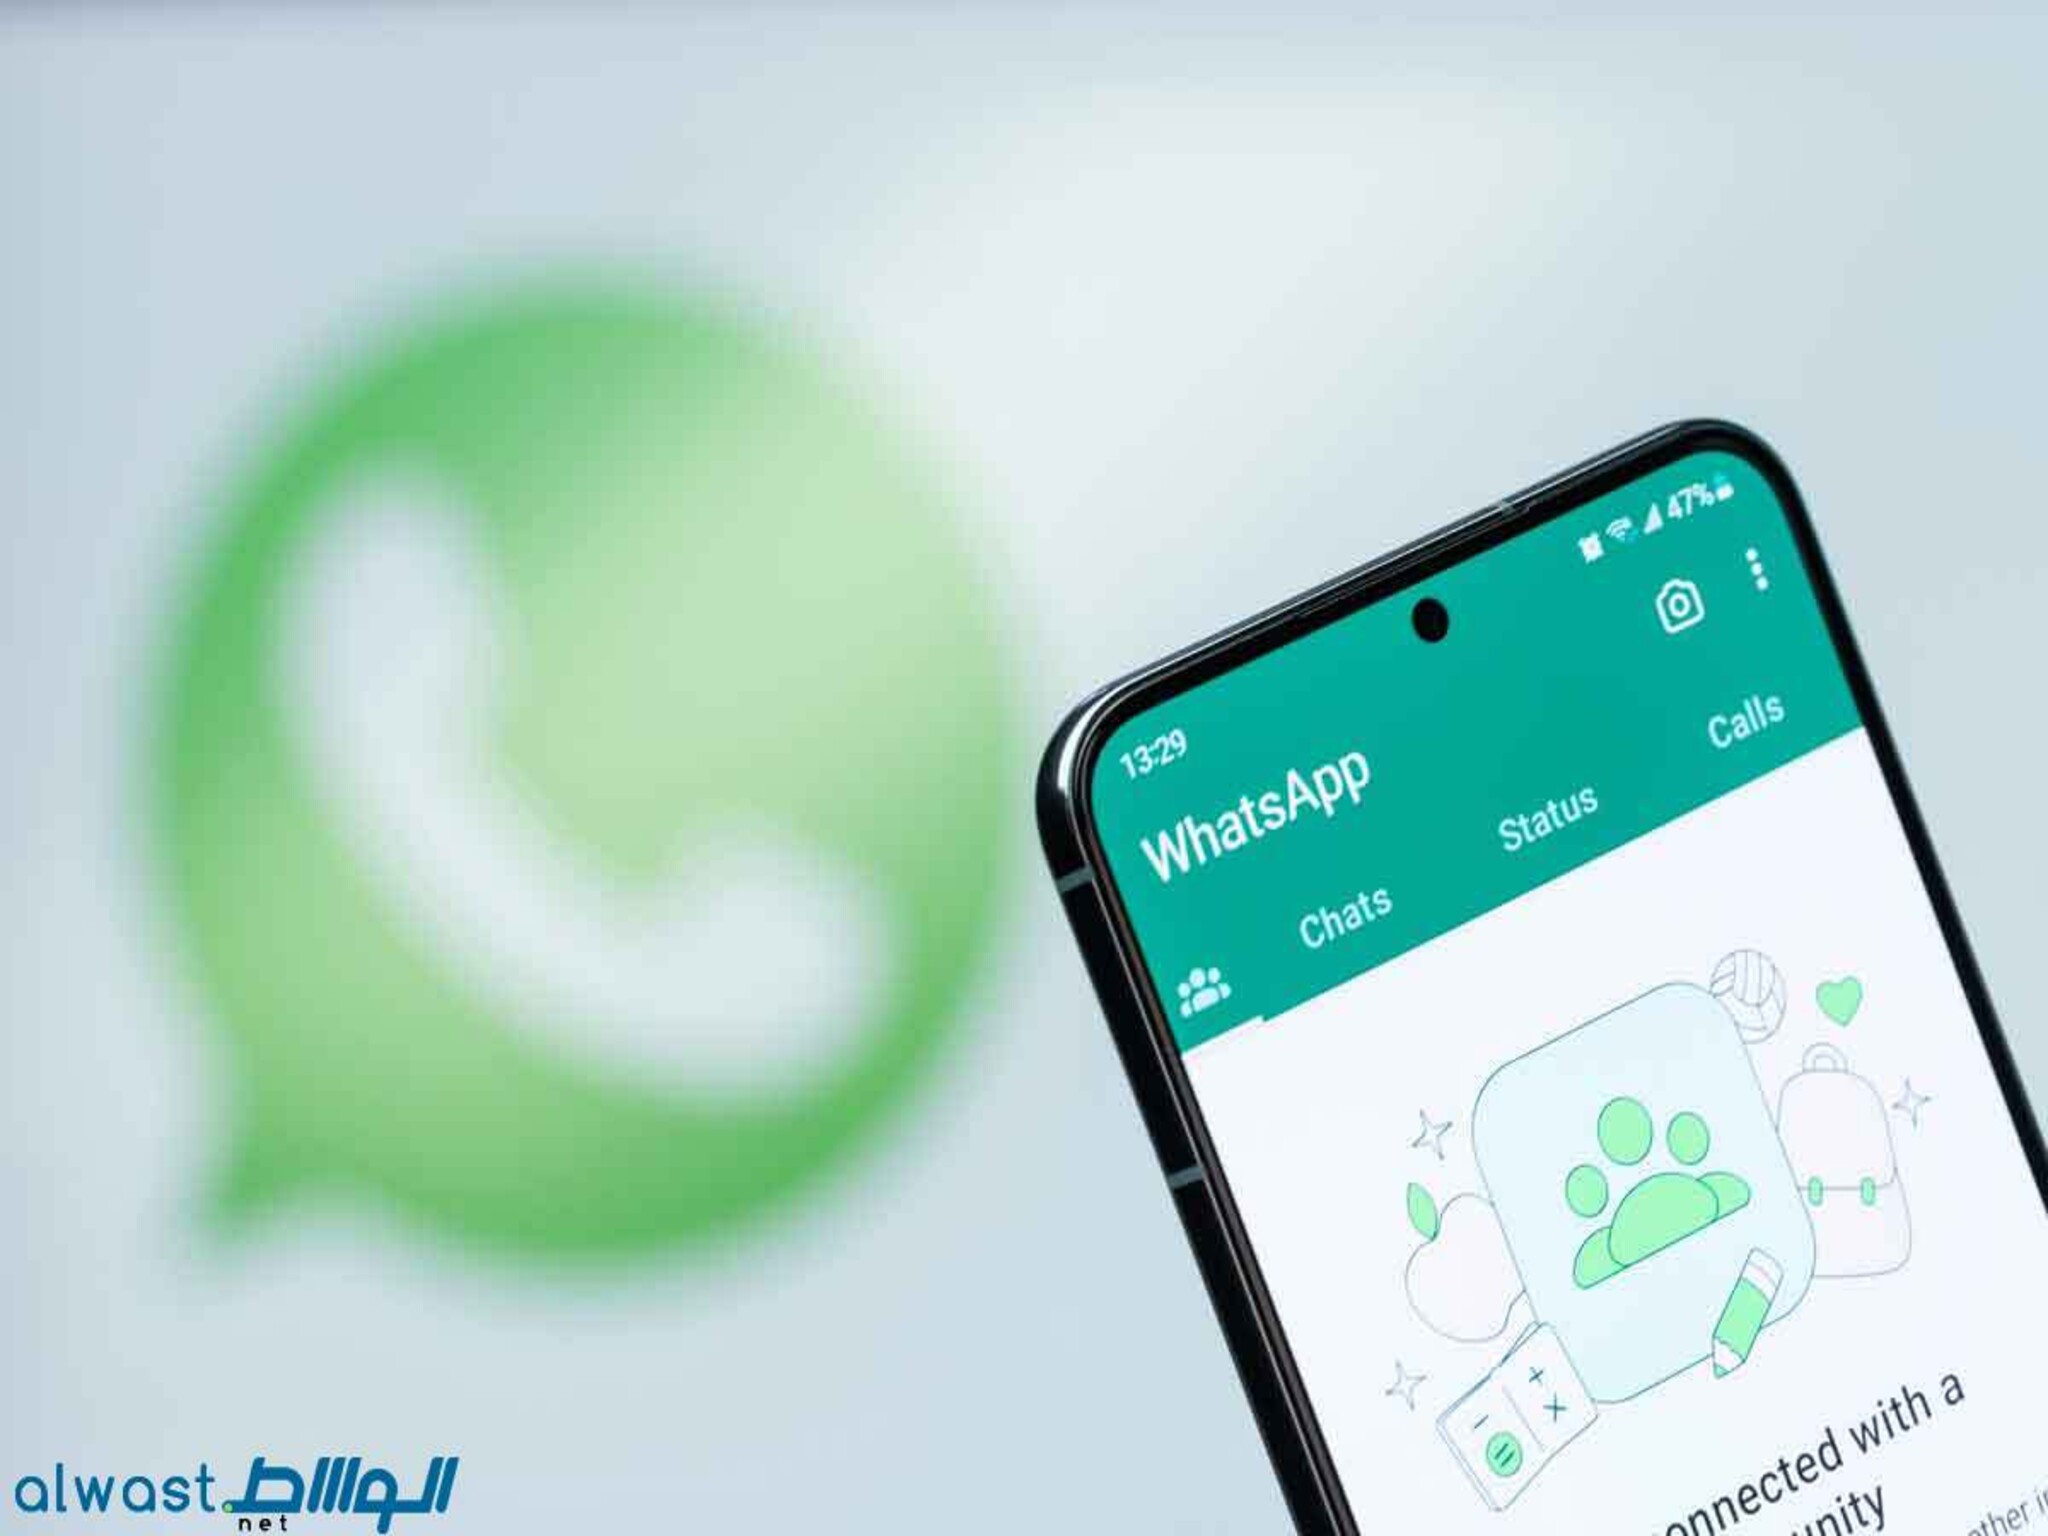 Latest WhatsApp Features in UAE: Chat Lock, Channels, Edit Messages